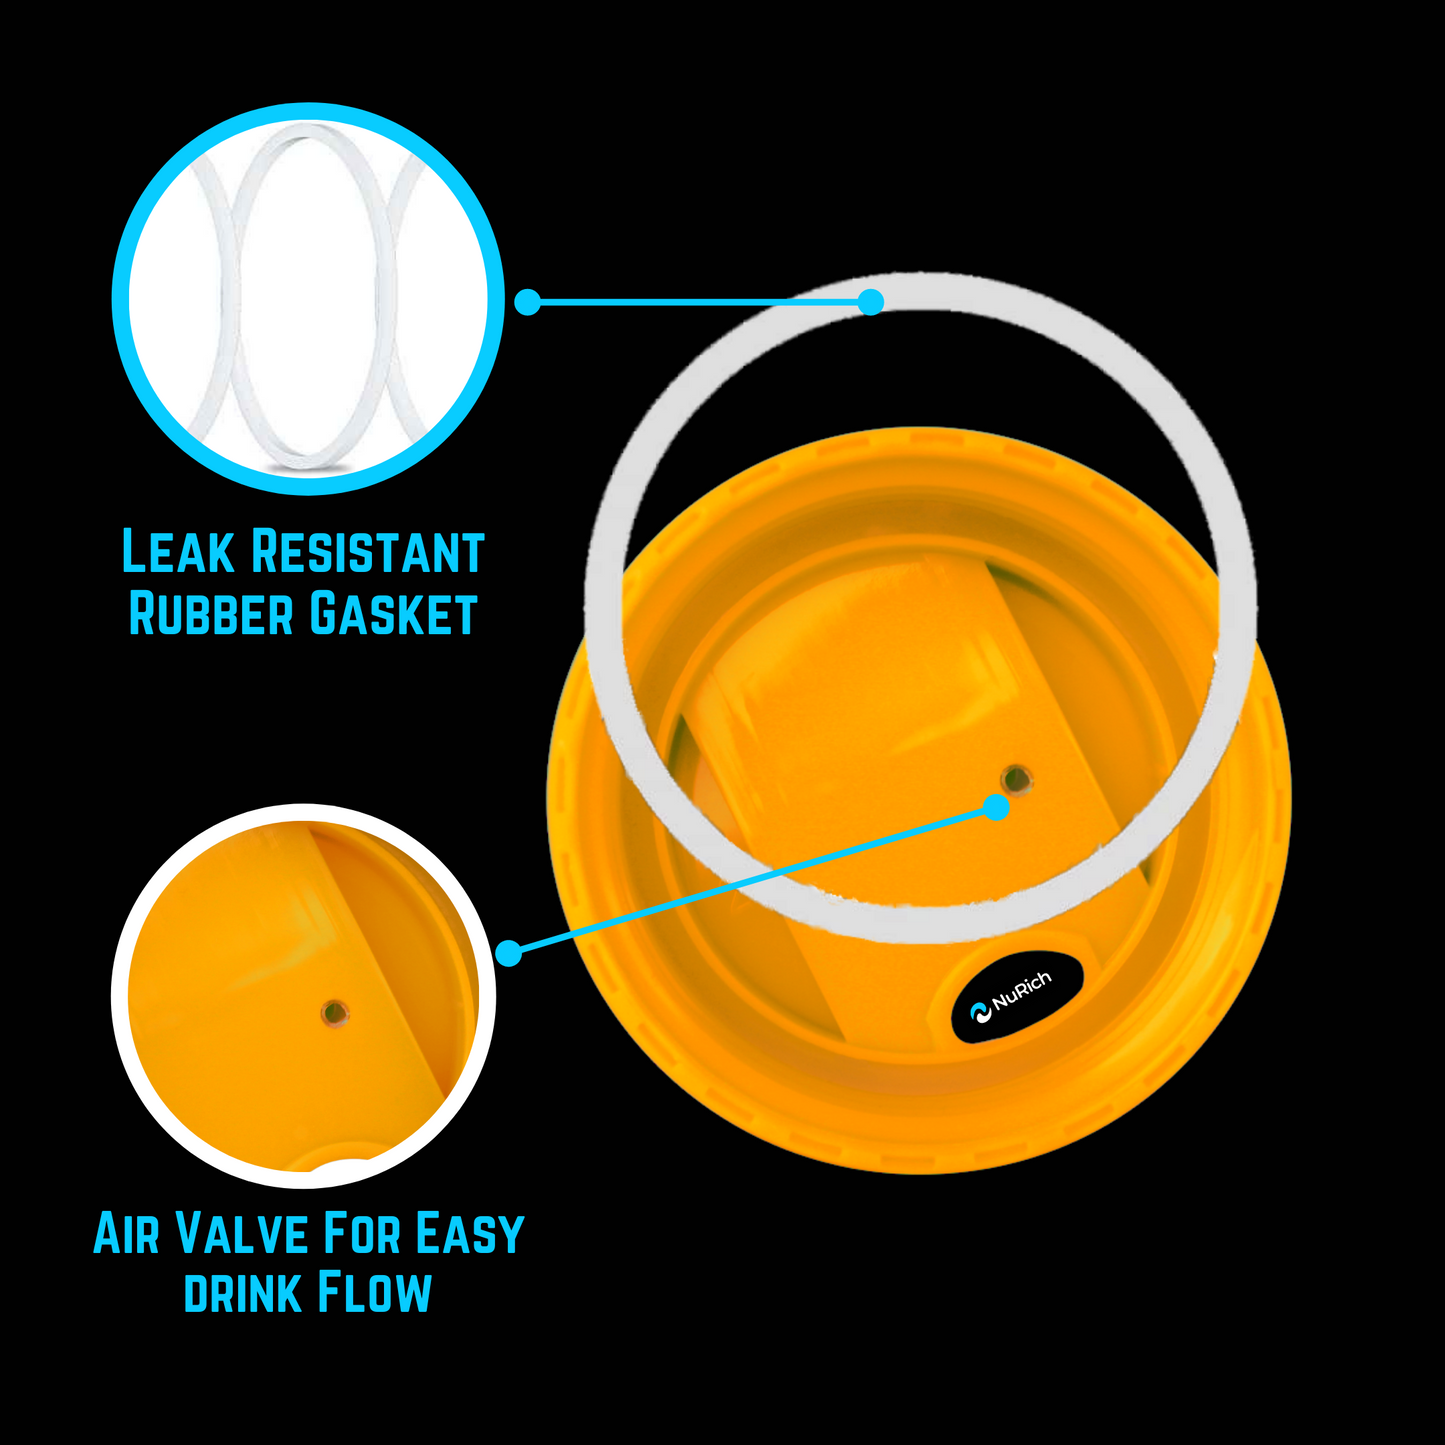 NuRich Hydro Wide Mouth Flip and Sip Replacement Coffee Lid or Cap Accessories Compatible with Hydroflask, Nalgene, and Many More Top Water Bottle Brands Sizes 12 16 18 20 32 40 64 Ounce - Mango Orange